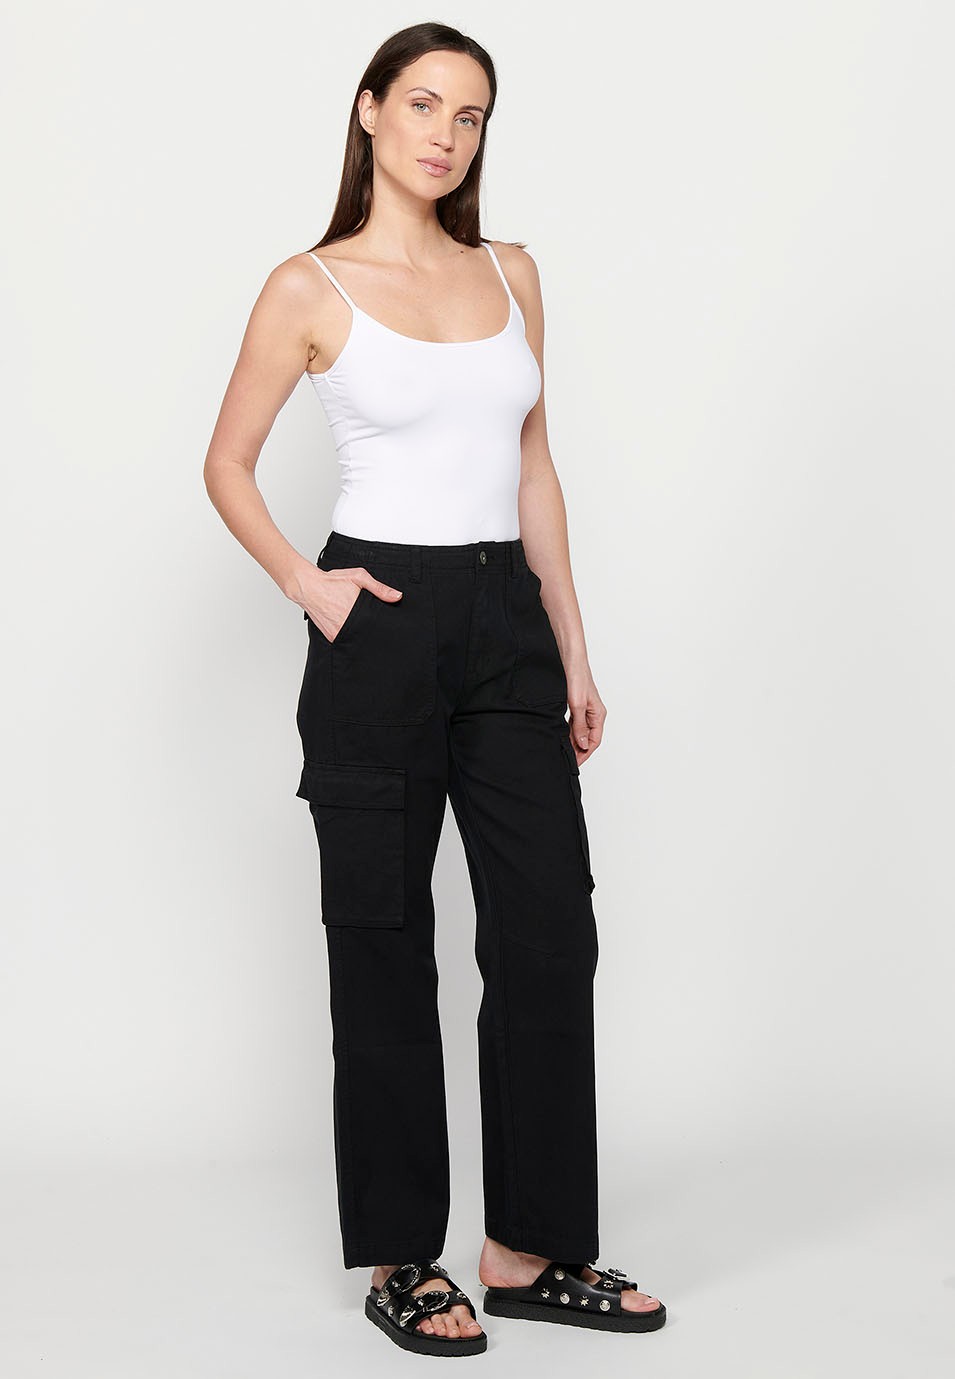 Long cotton cargo pants with pockets, black color for women